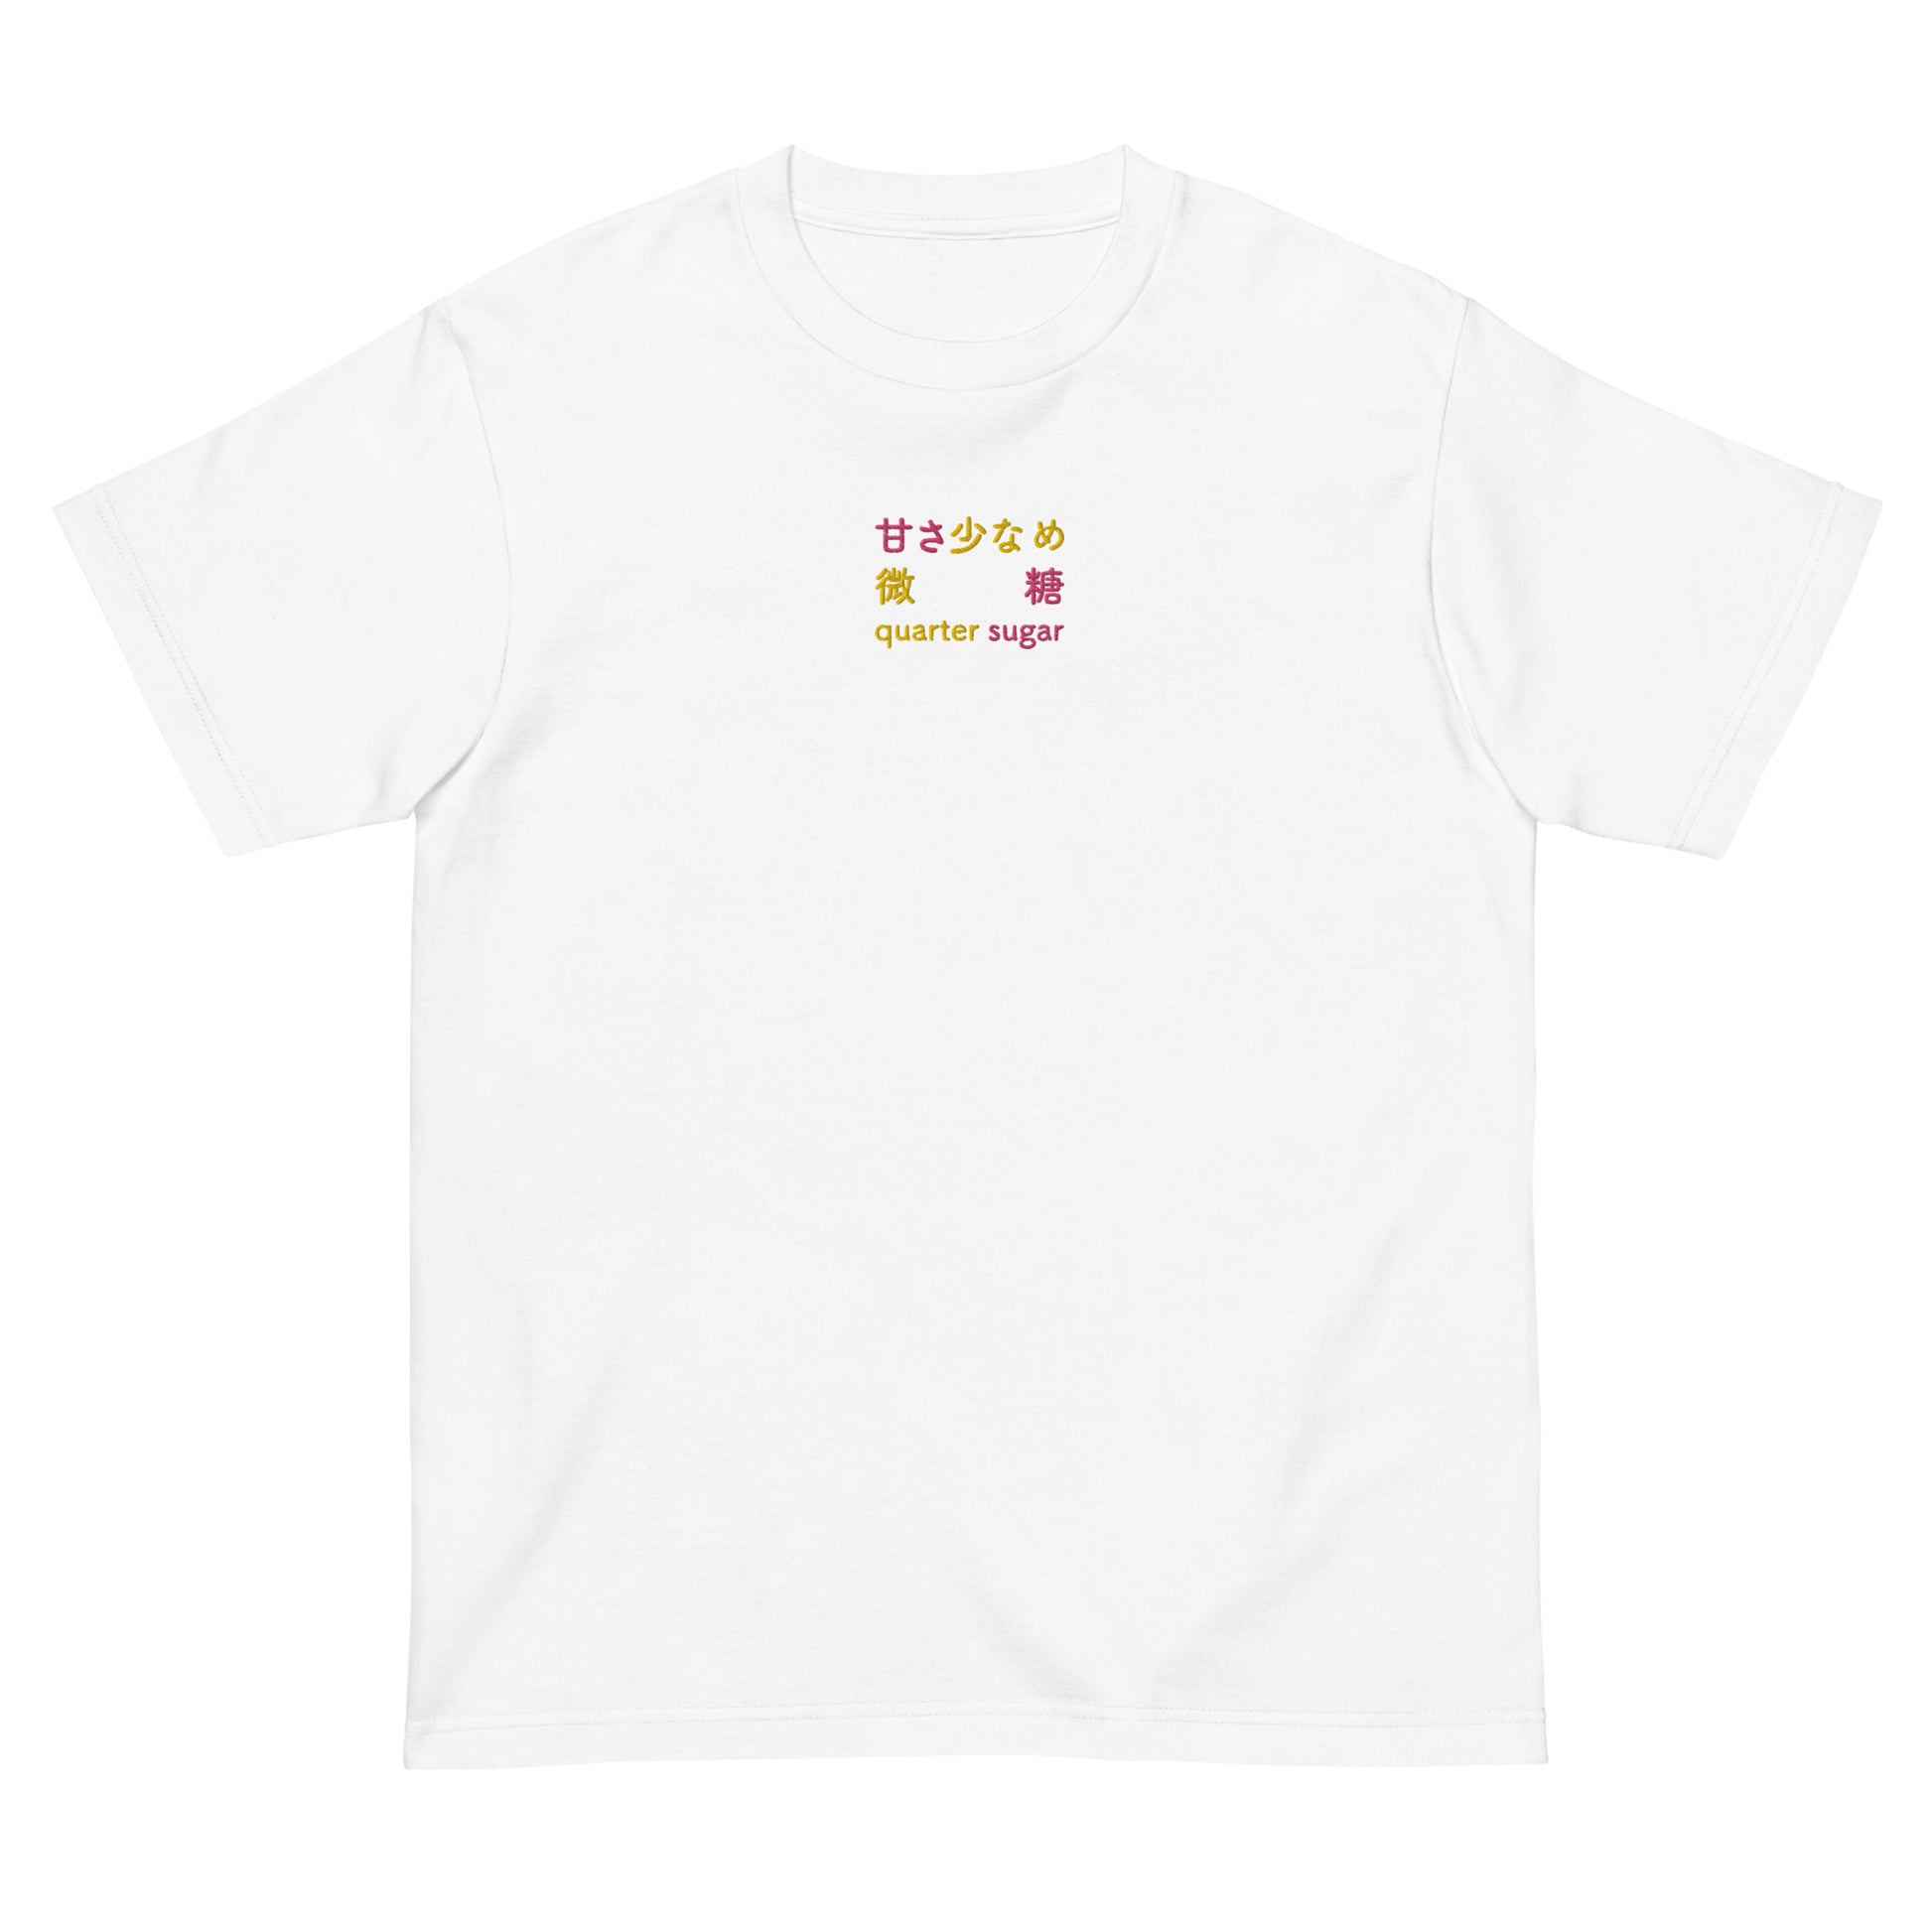 White High Quality Tee - Front Design with an Yellow, Pink Embroidery "Quarter Sugar" in Japanese,Chinese and English